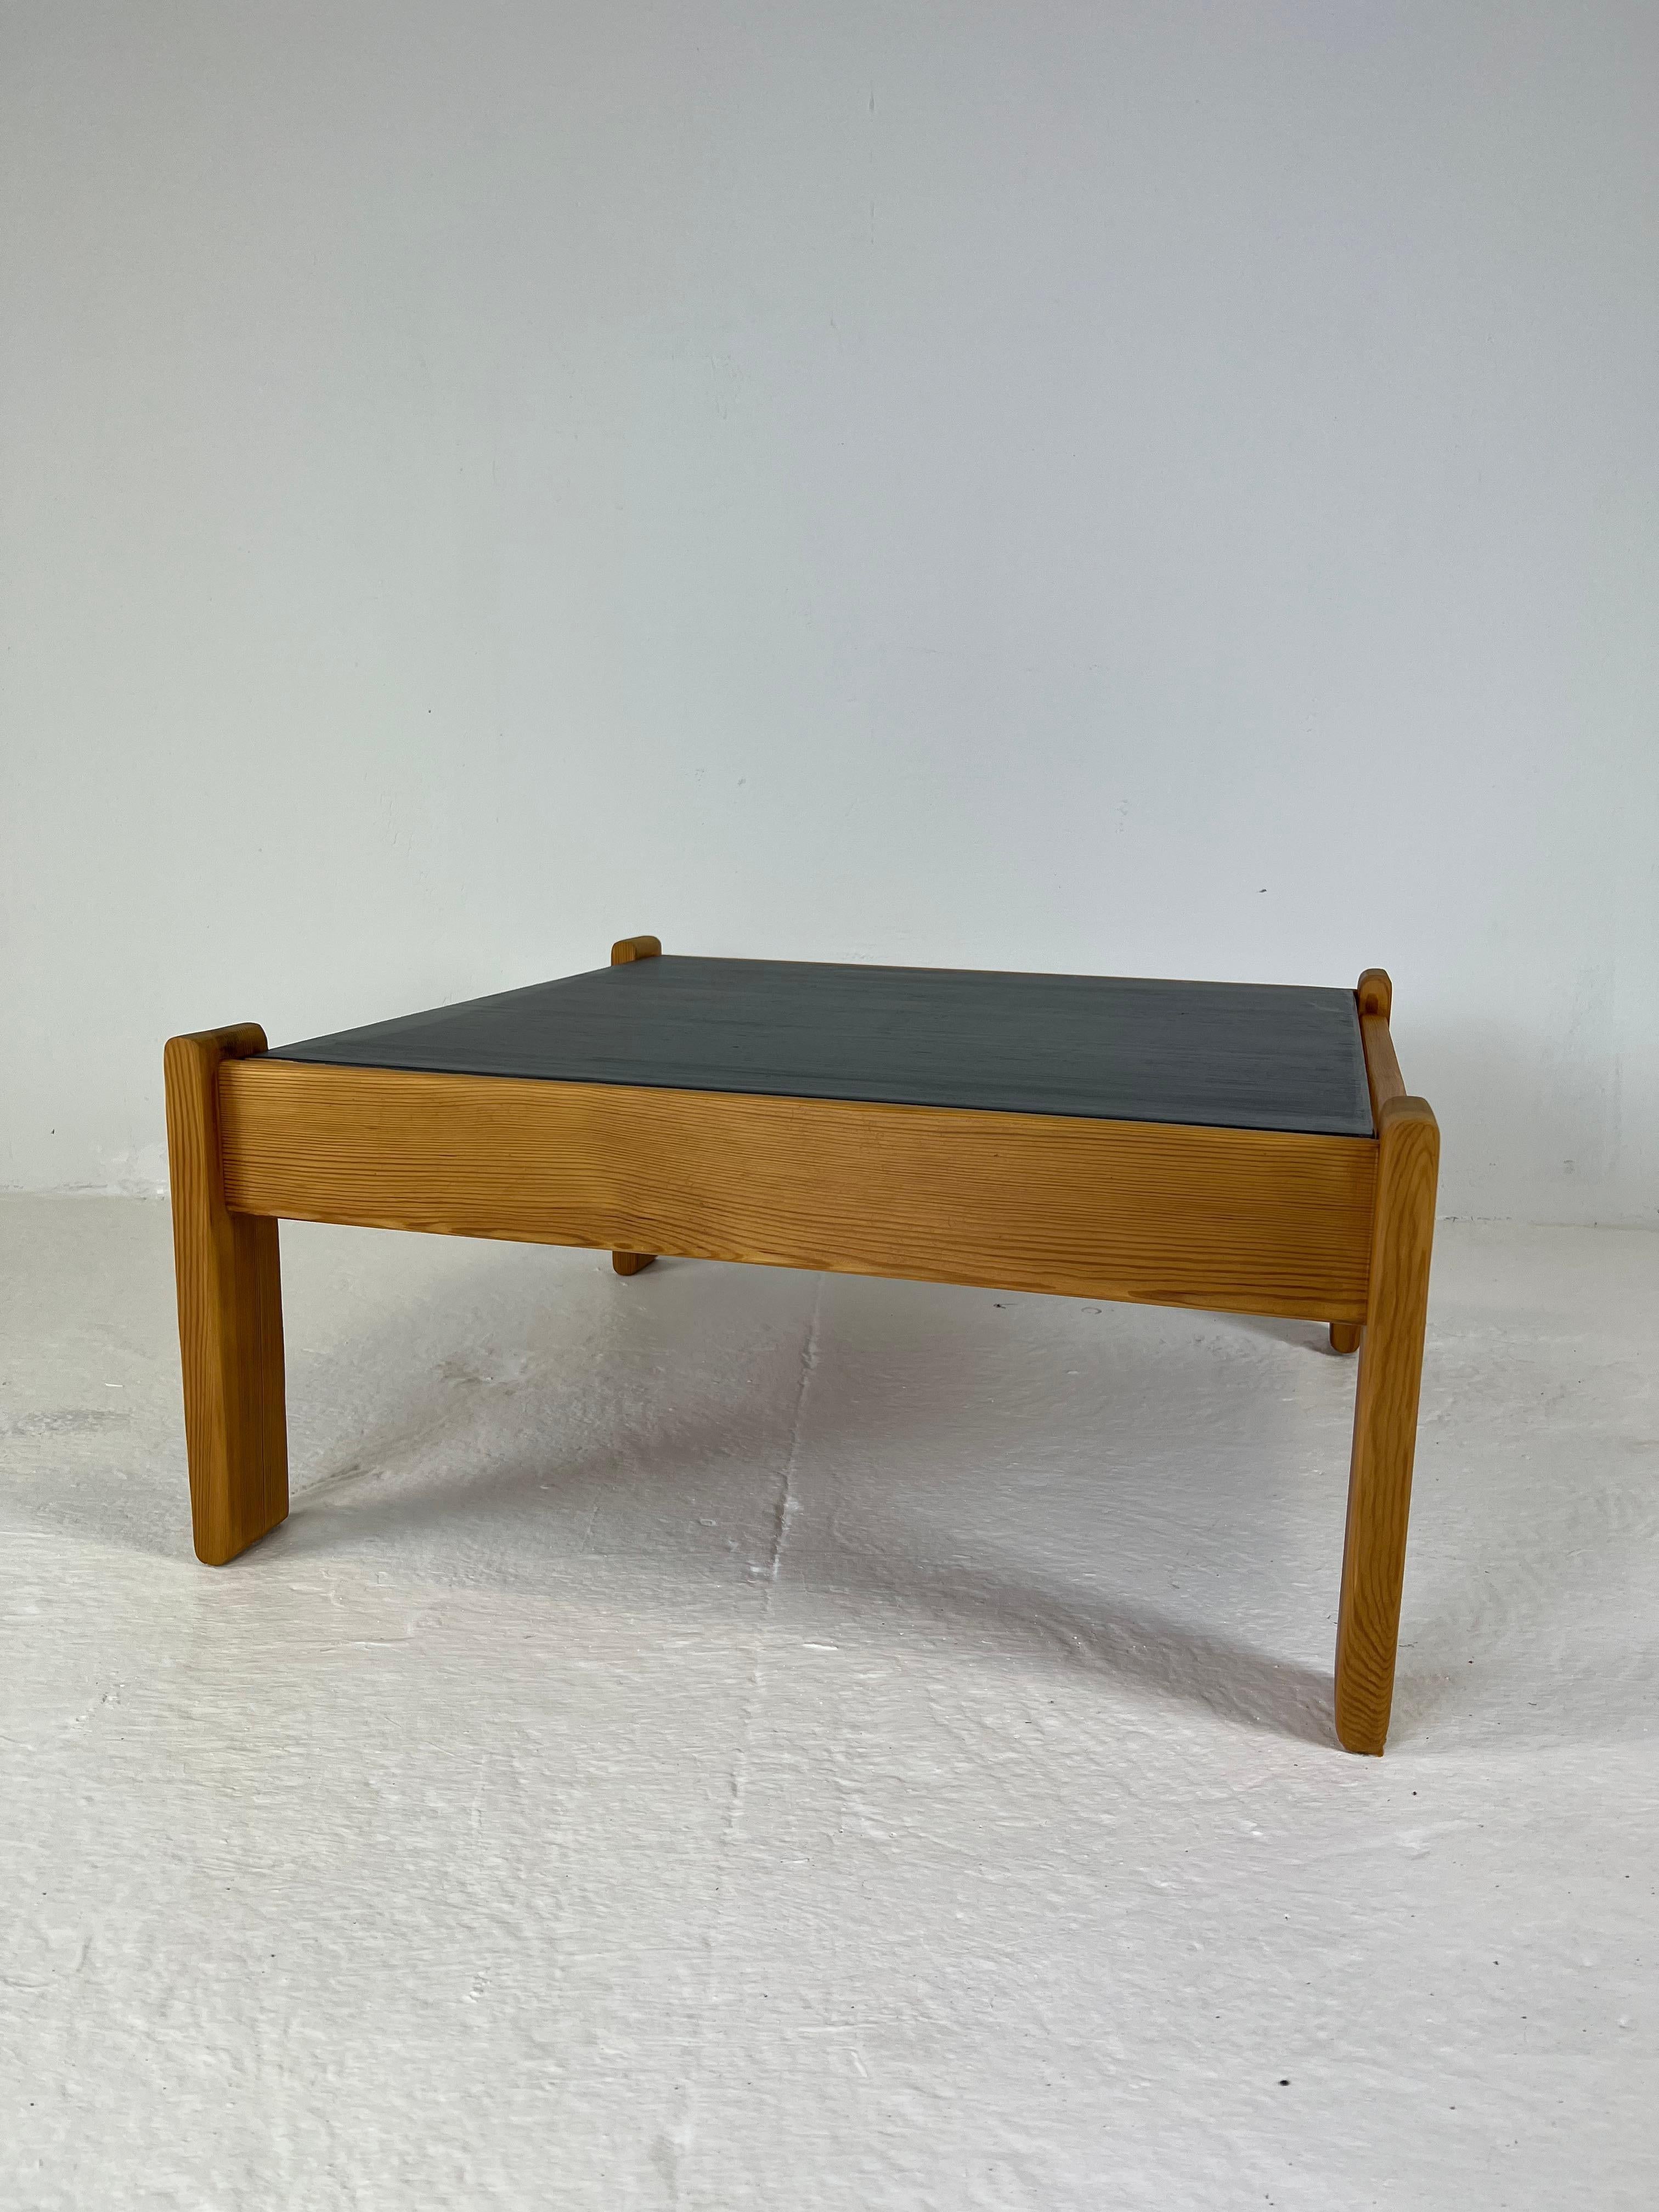 Two-Sided Modernist Coffee Table in Pine Wood, 1970s For Sale 3